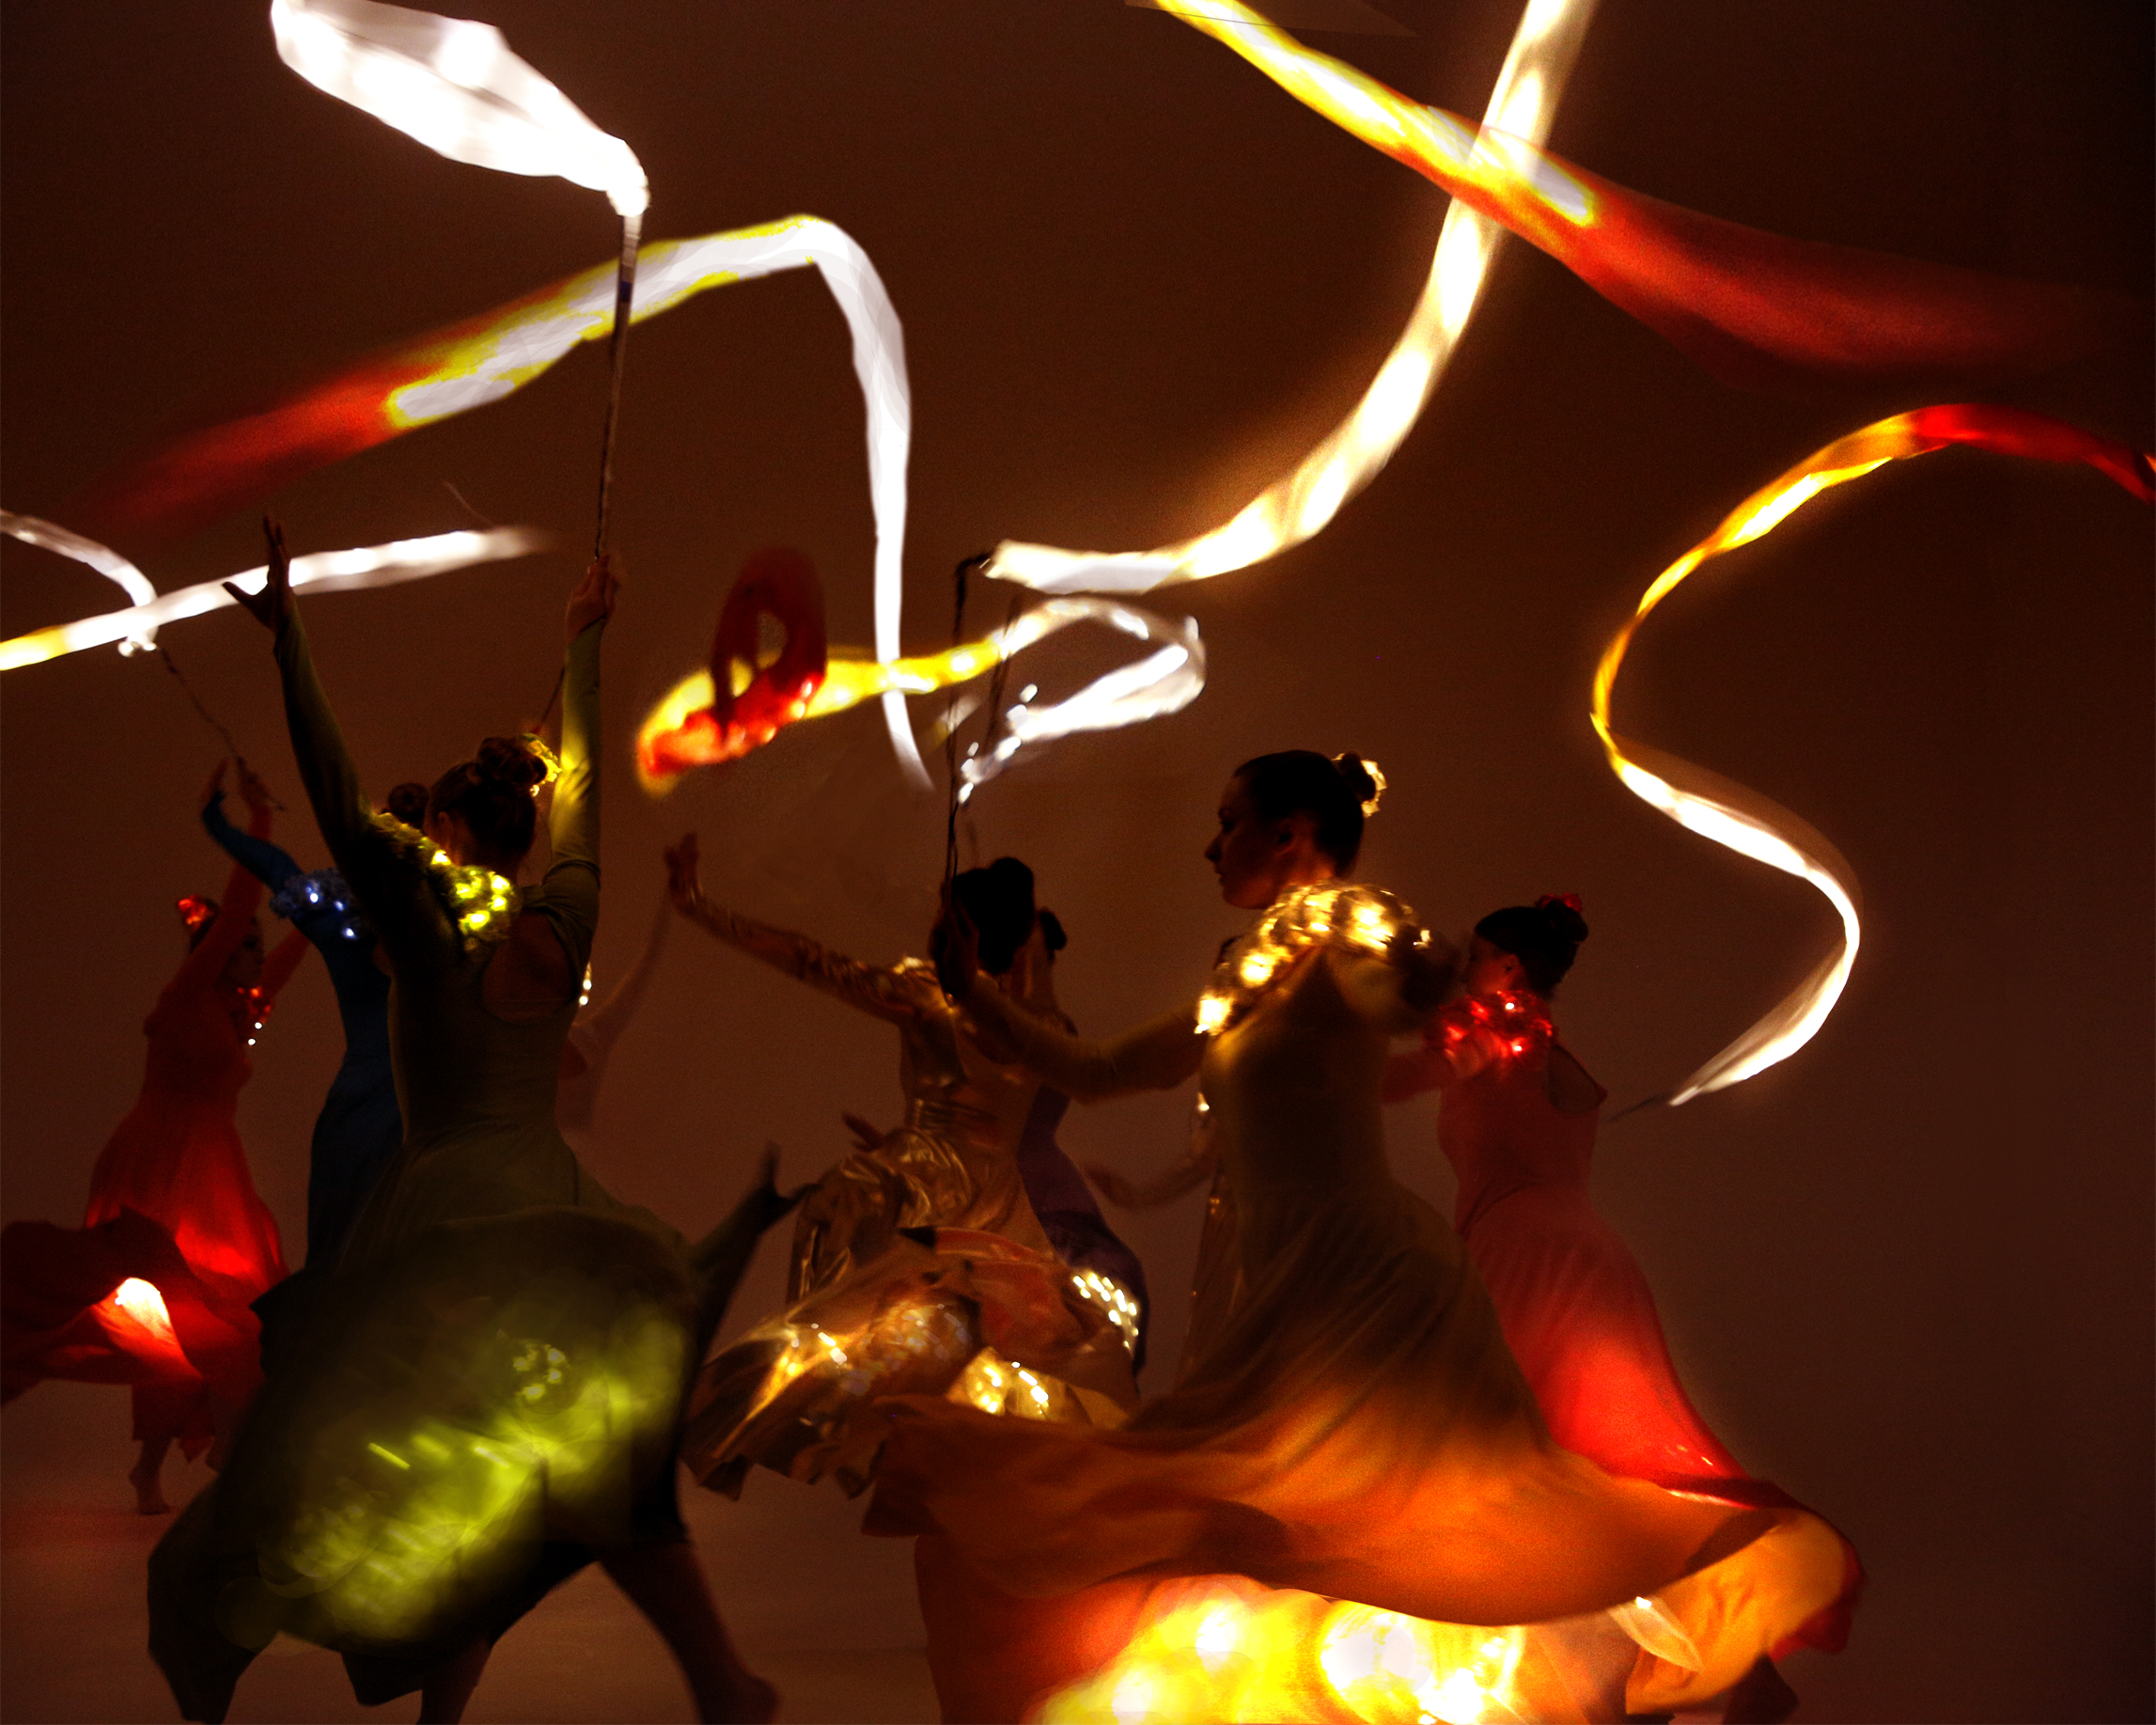 Light Emitting Dance in colour with illuminated ribbons 3, Divine Company.jpg